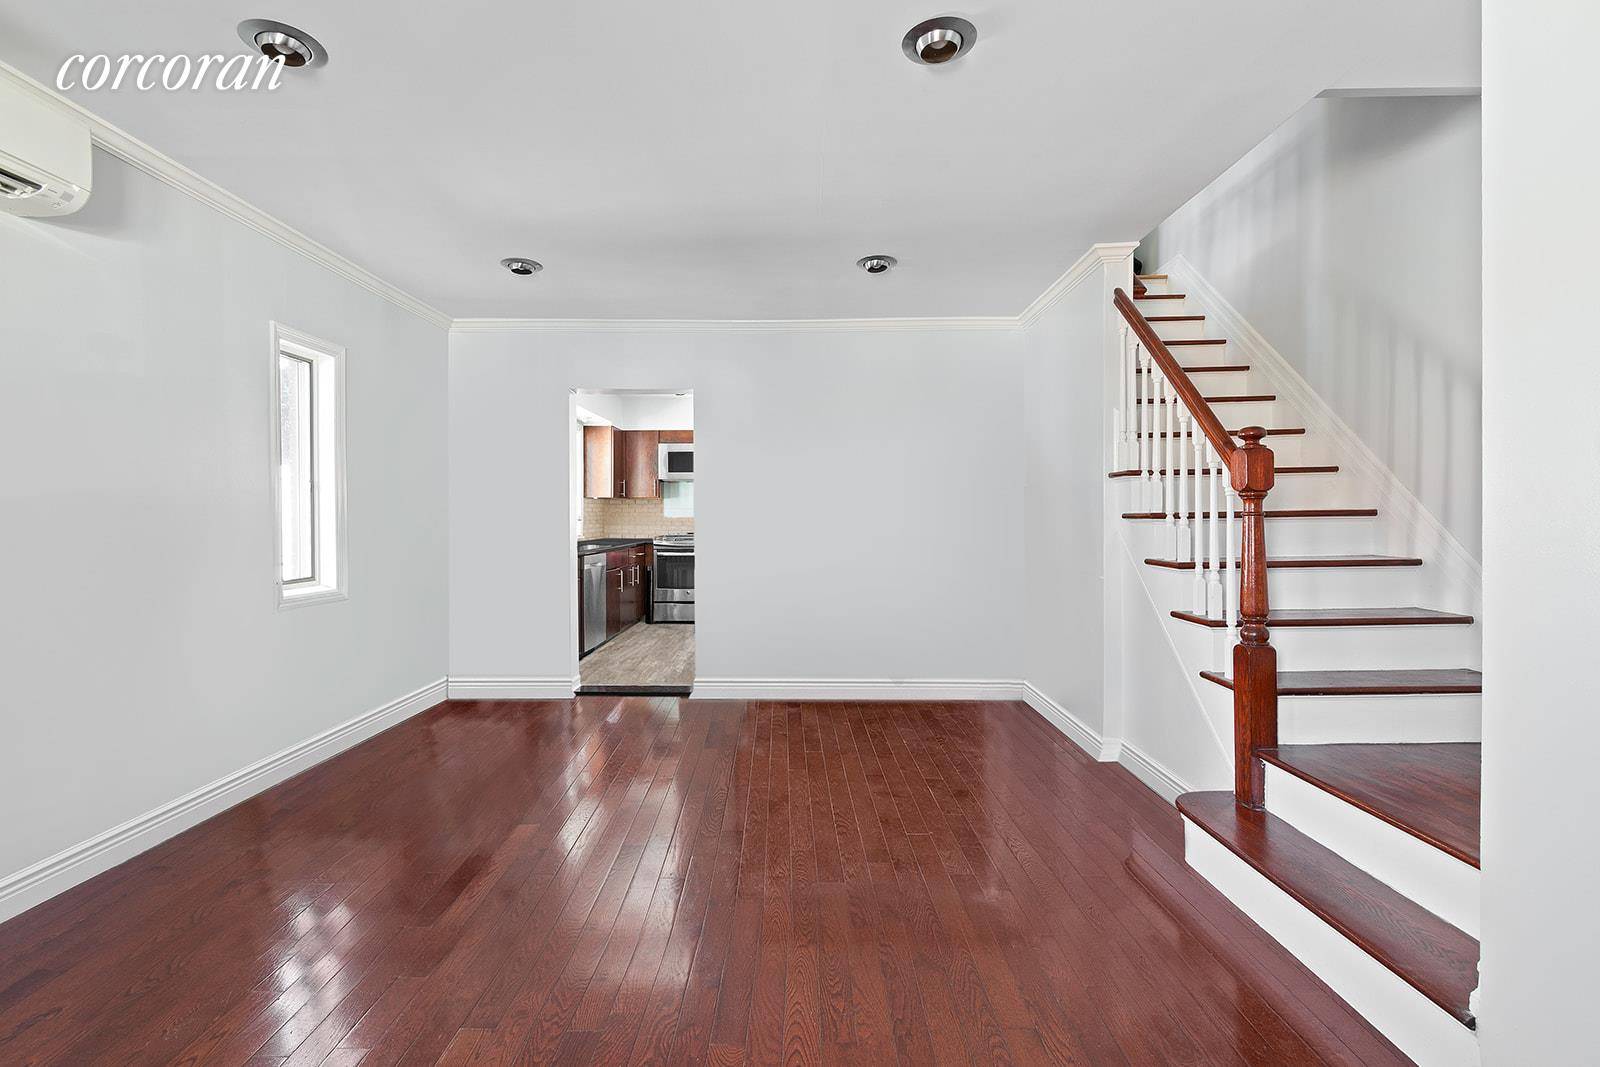 Stunning and exquisite single family home situated in the coveted Whitestone neighborhood.